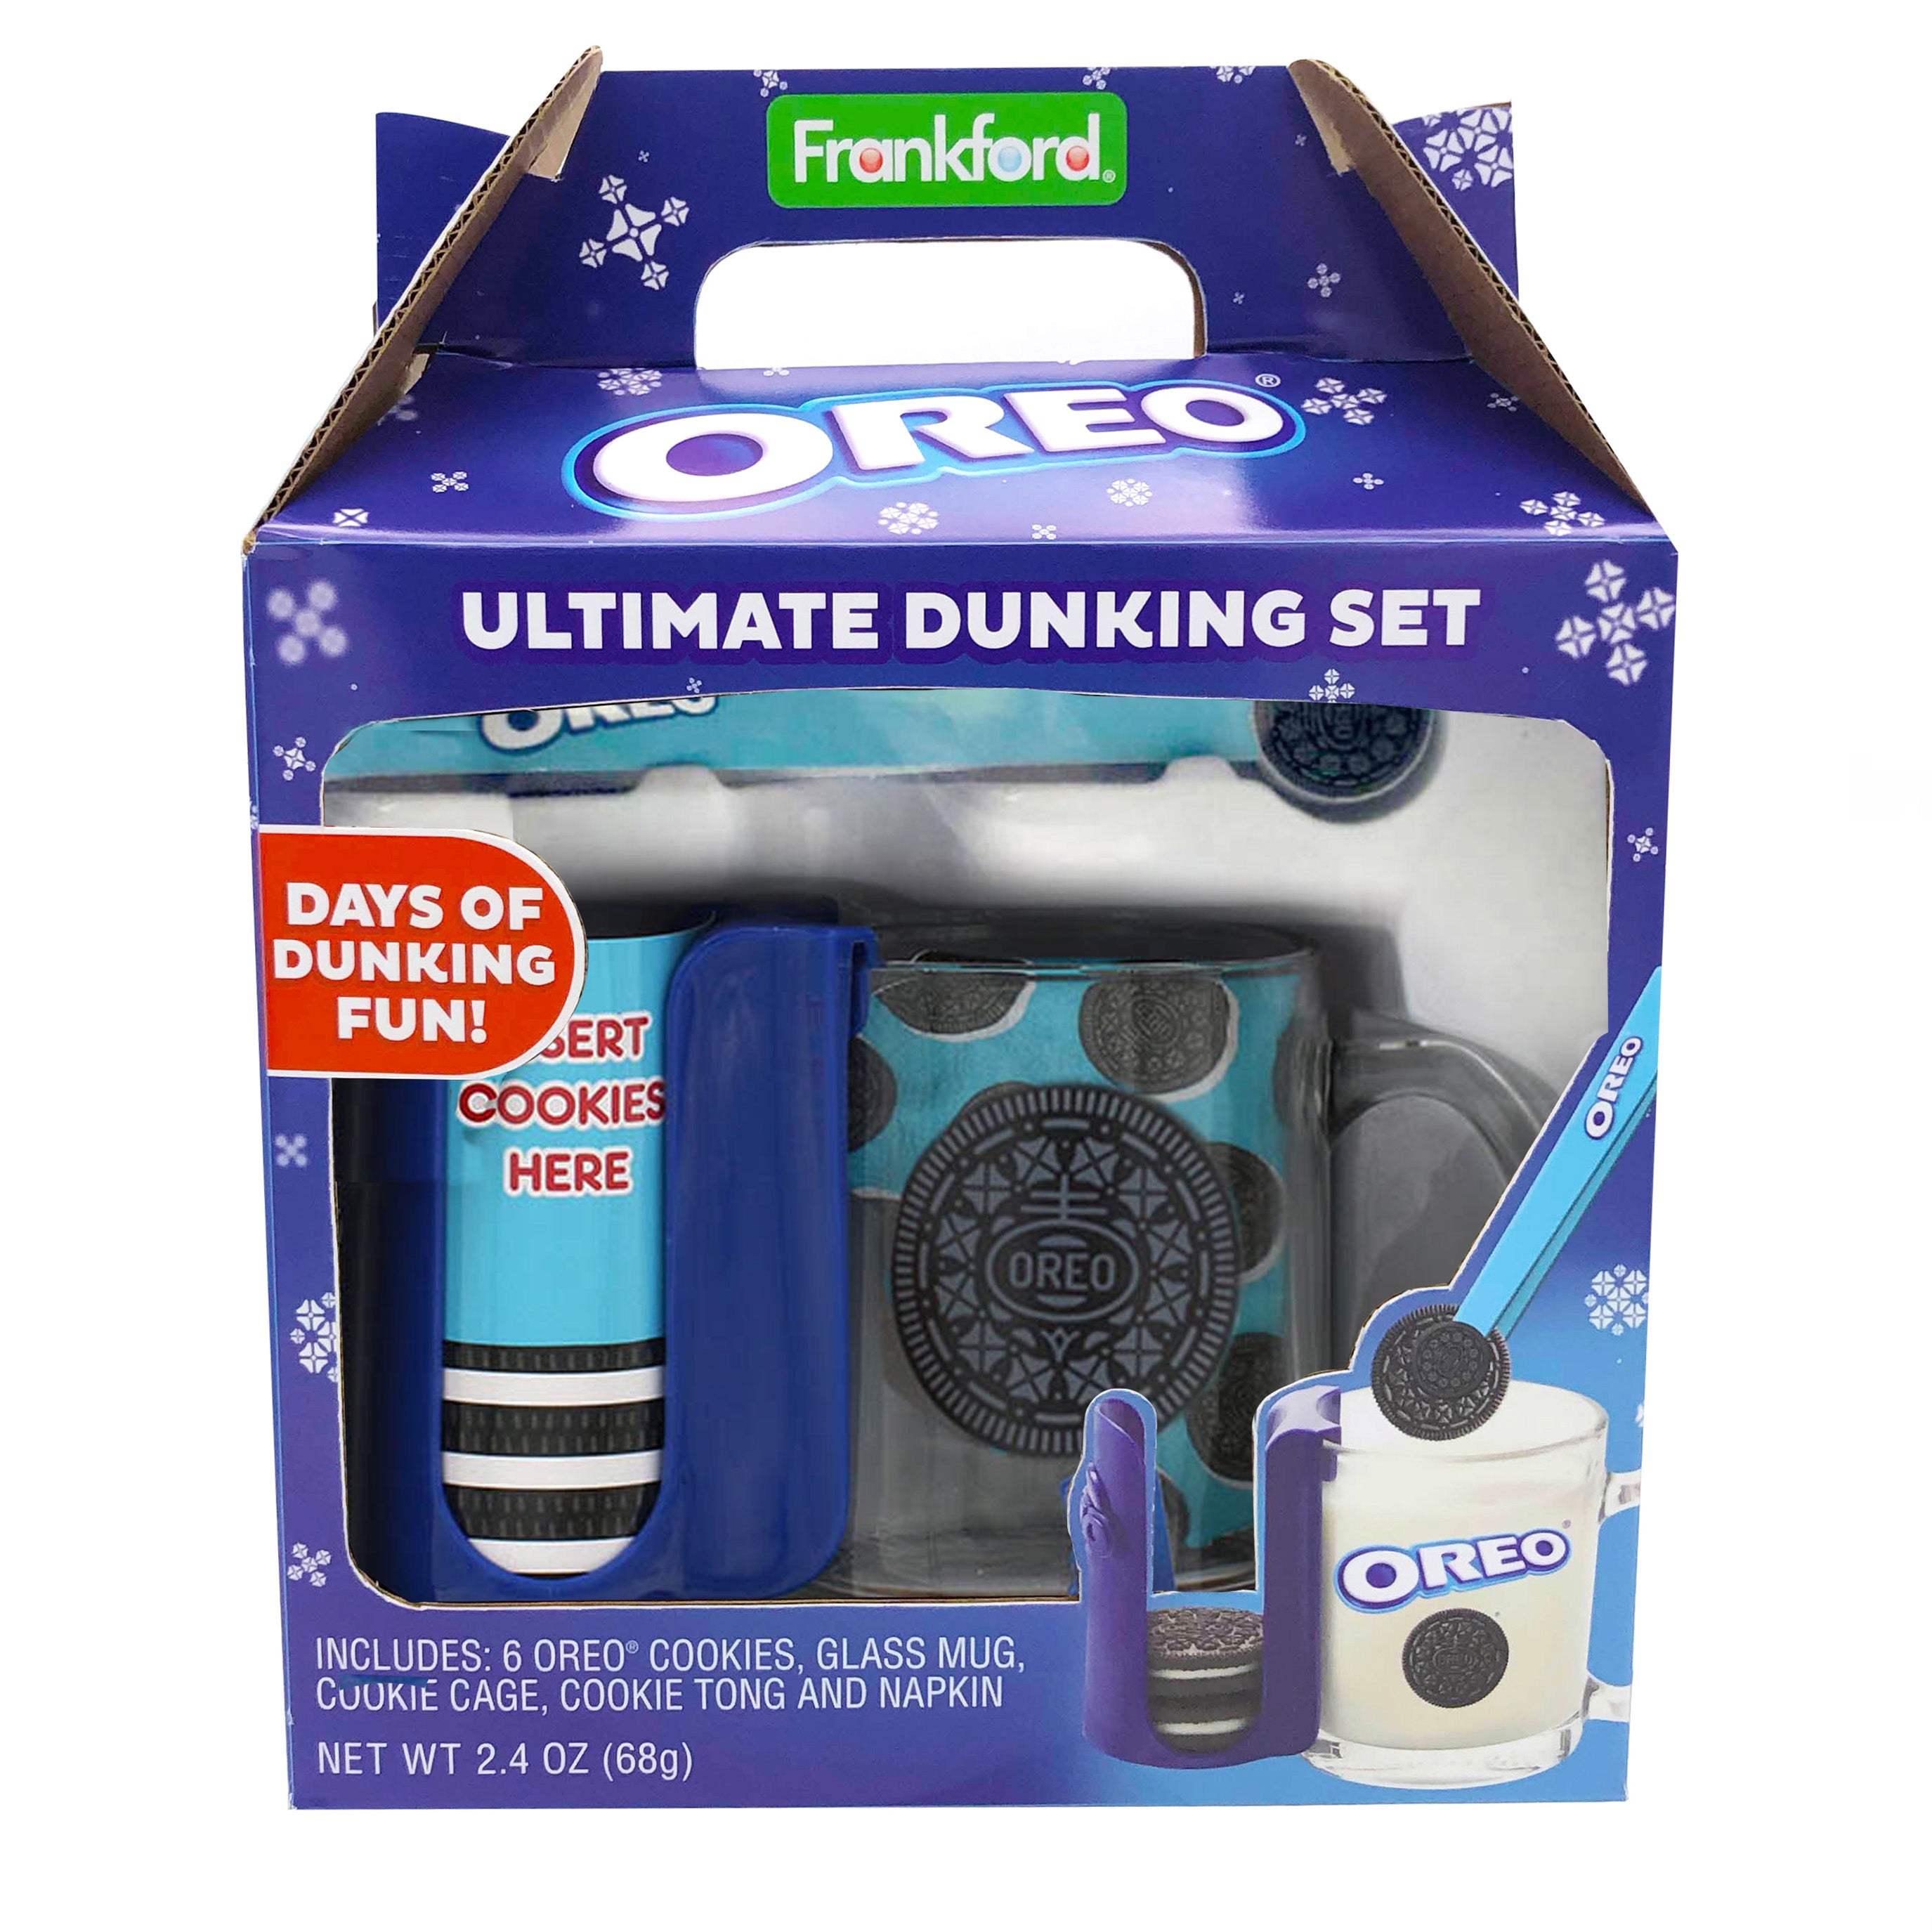 Frankford Candy Company Oreo 5 Piece Milkshake Gift Set New In Package